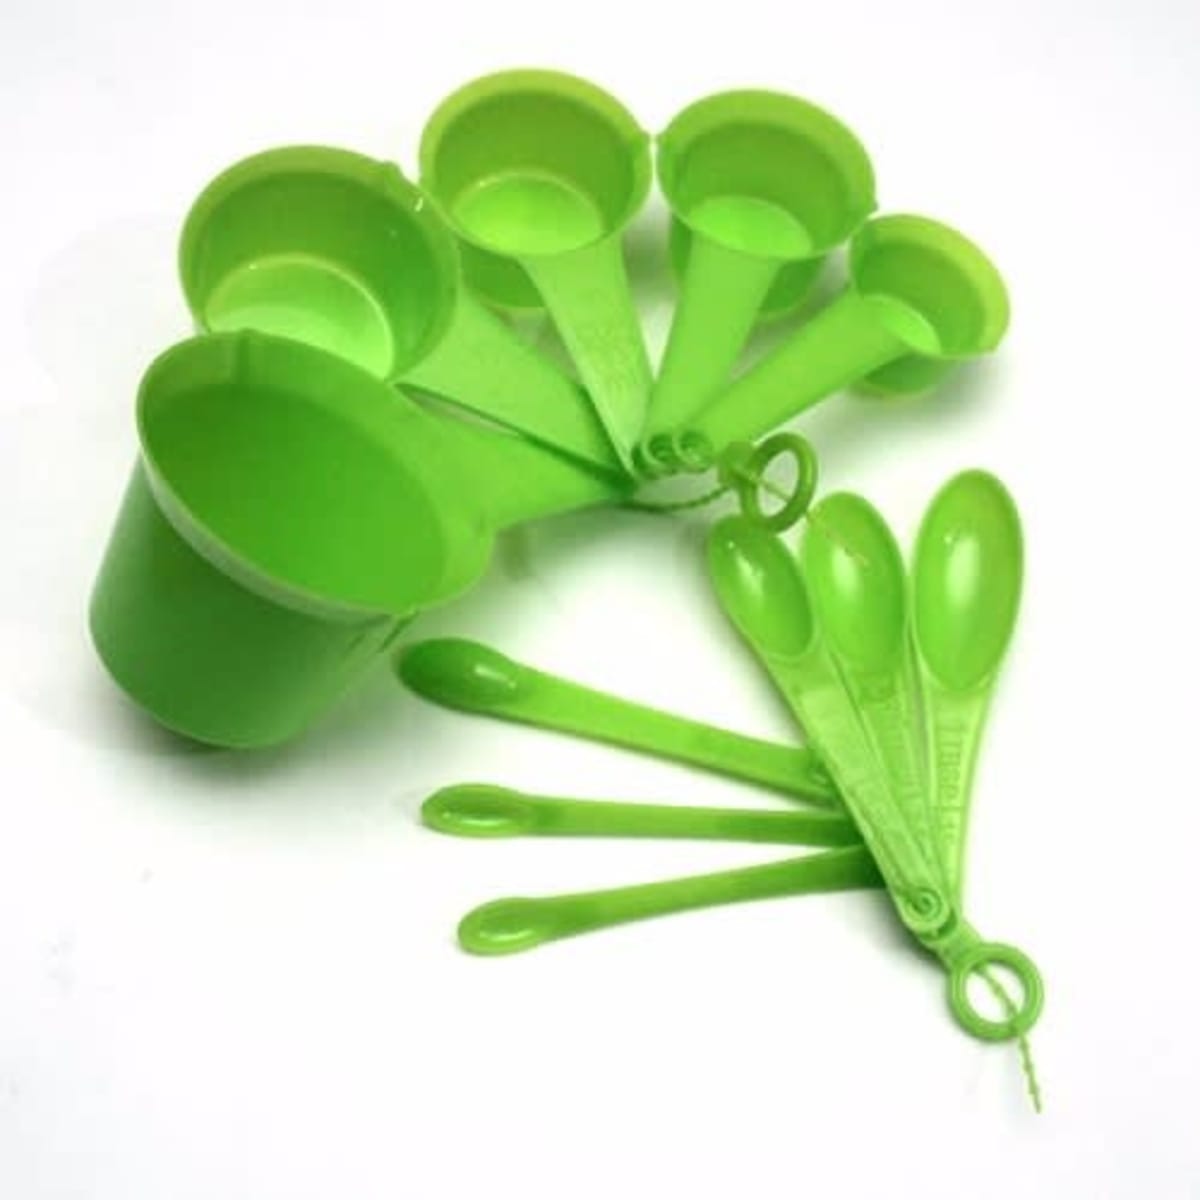 Green on Black Measuring Cup and Spoon Set